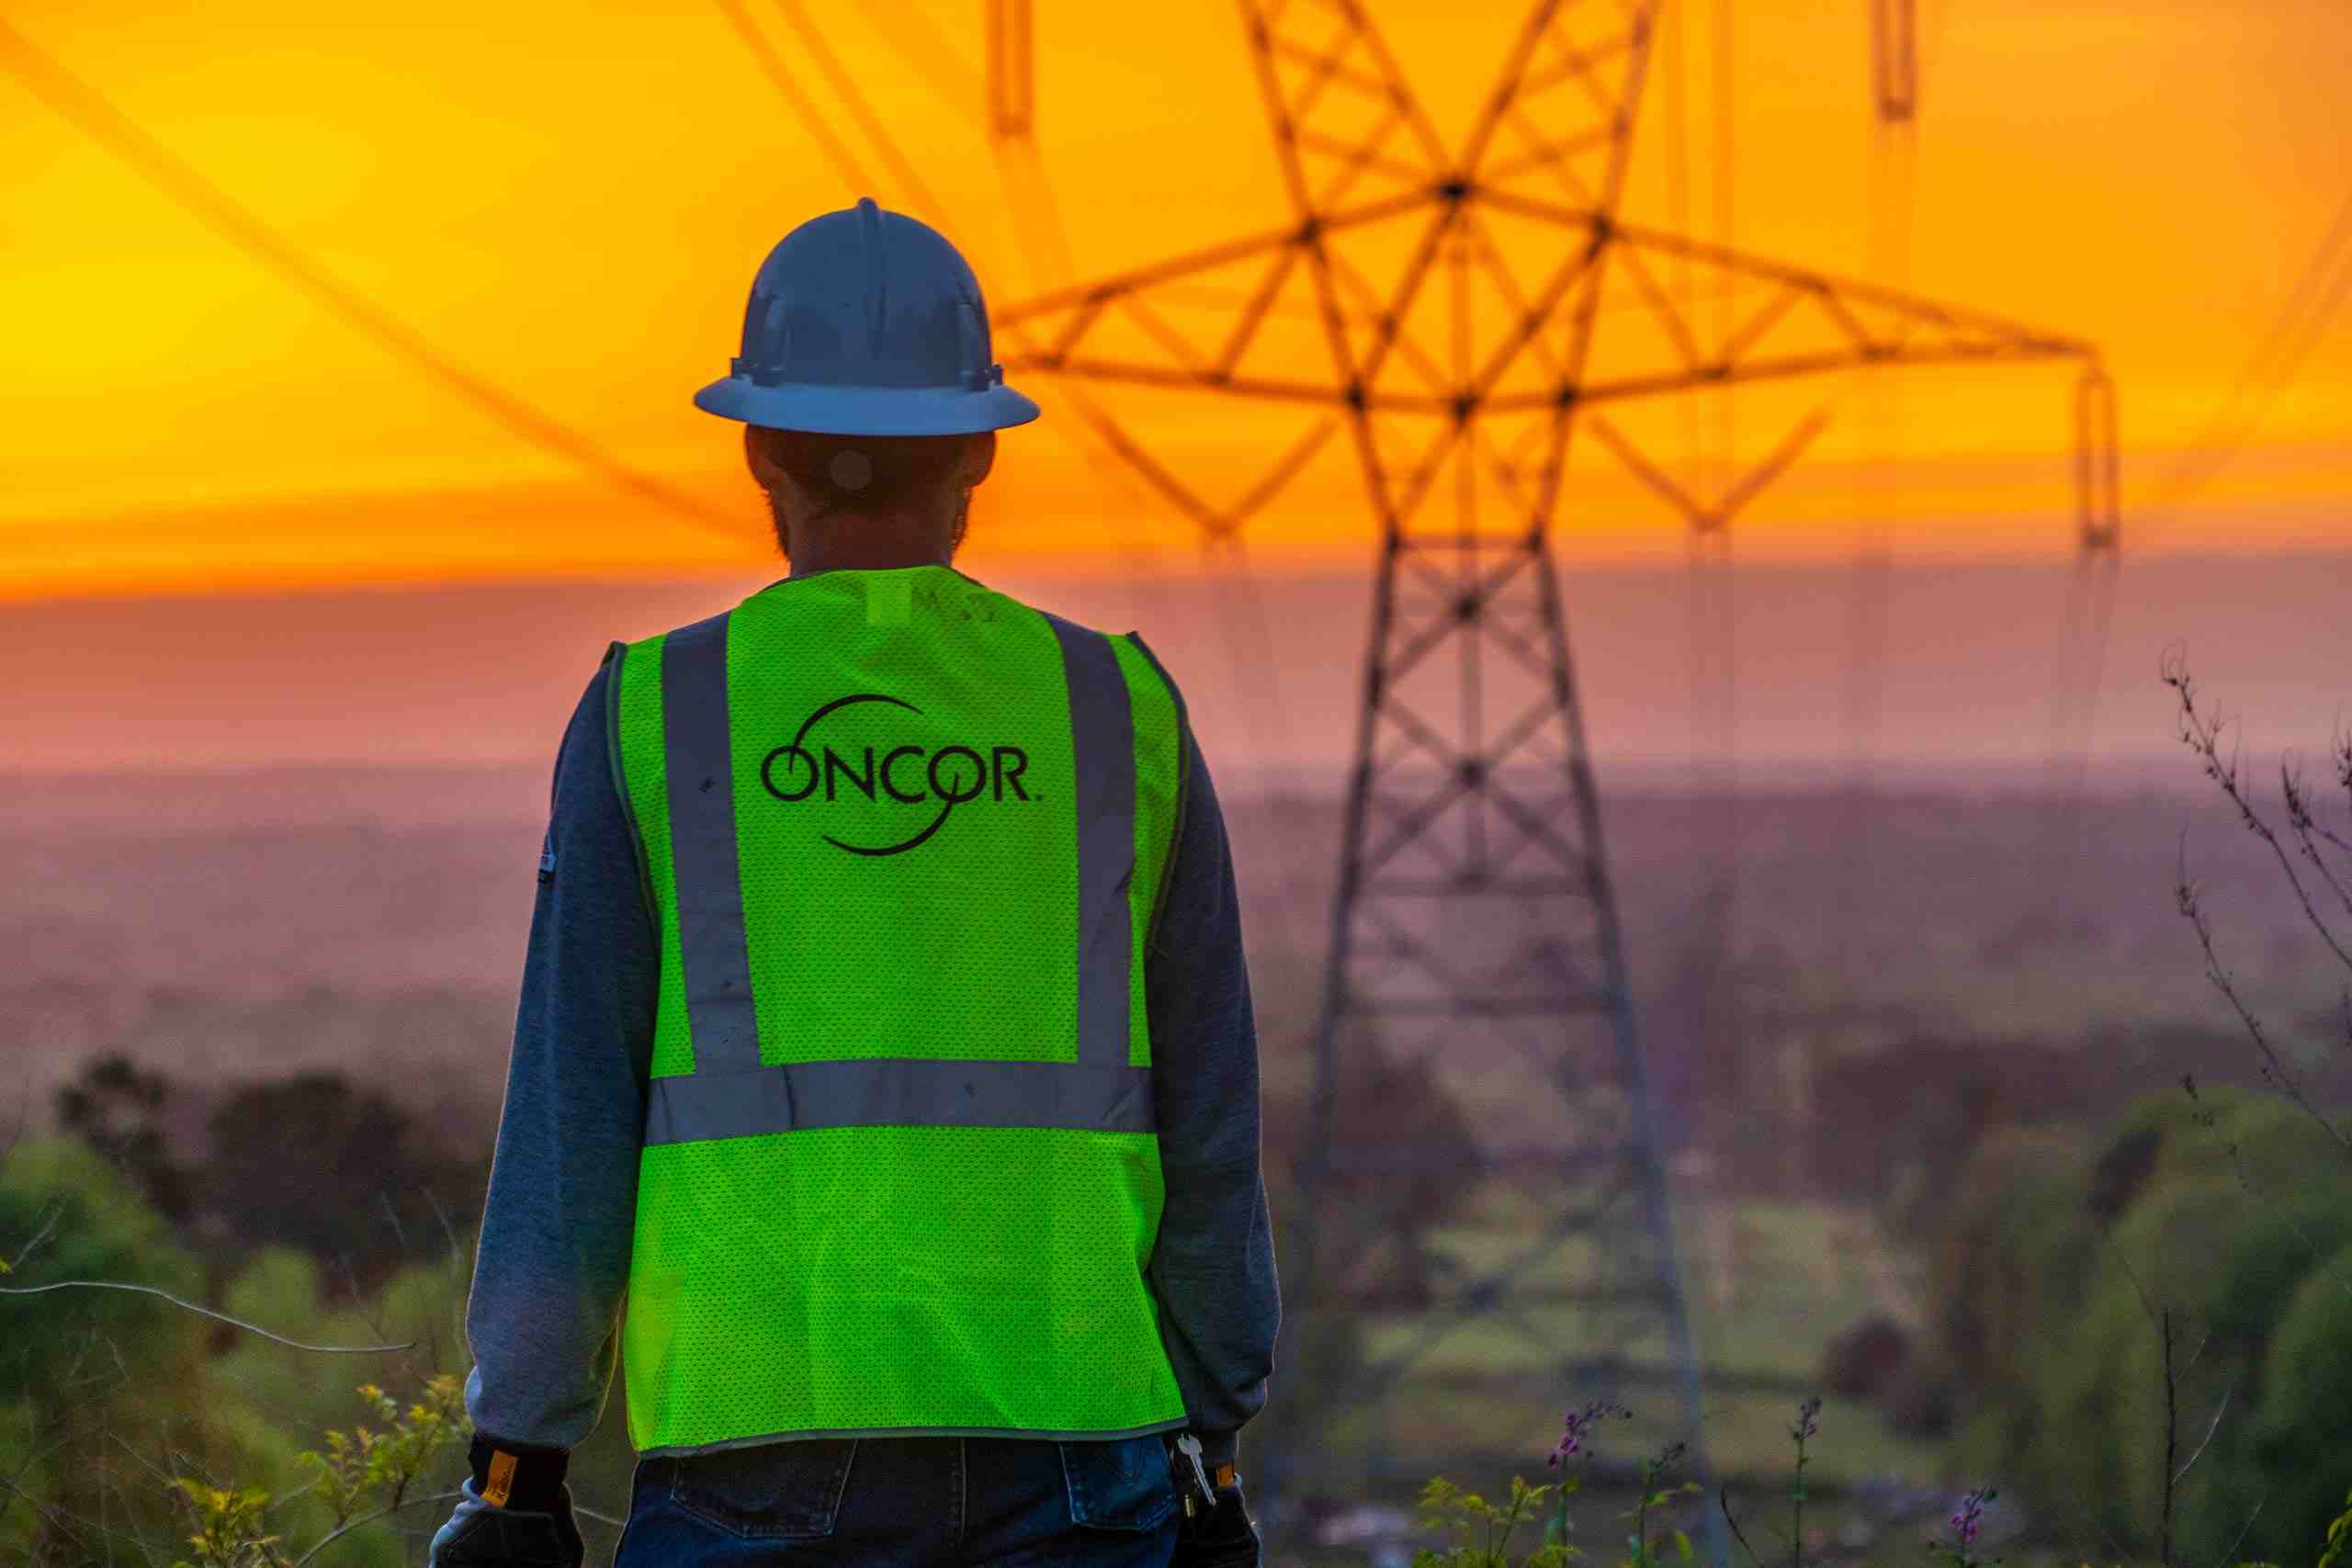 Embracing the Dawn: Oncor Lineman Conducting Sunrise Inspection of Energy Infrastructure